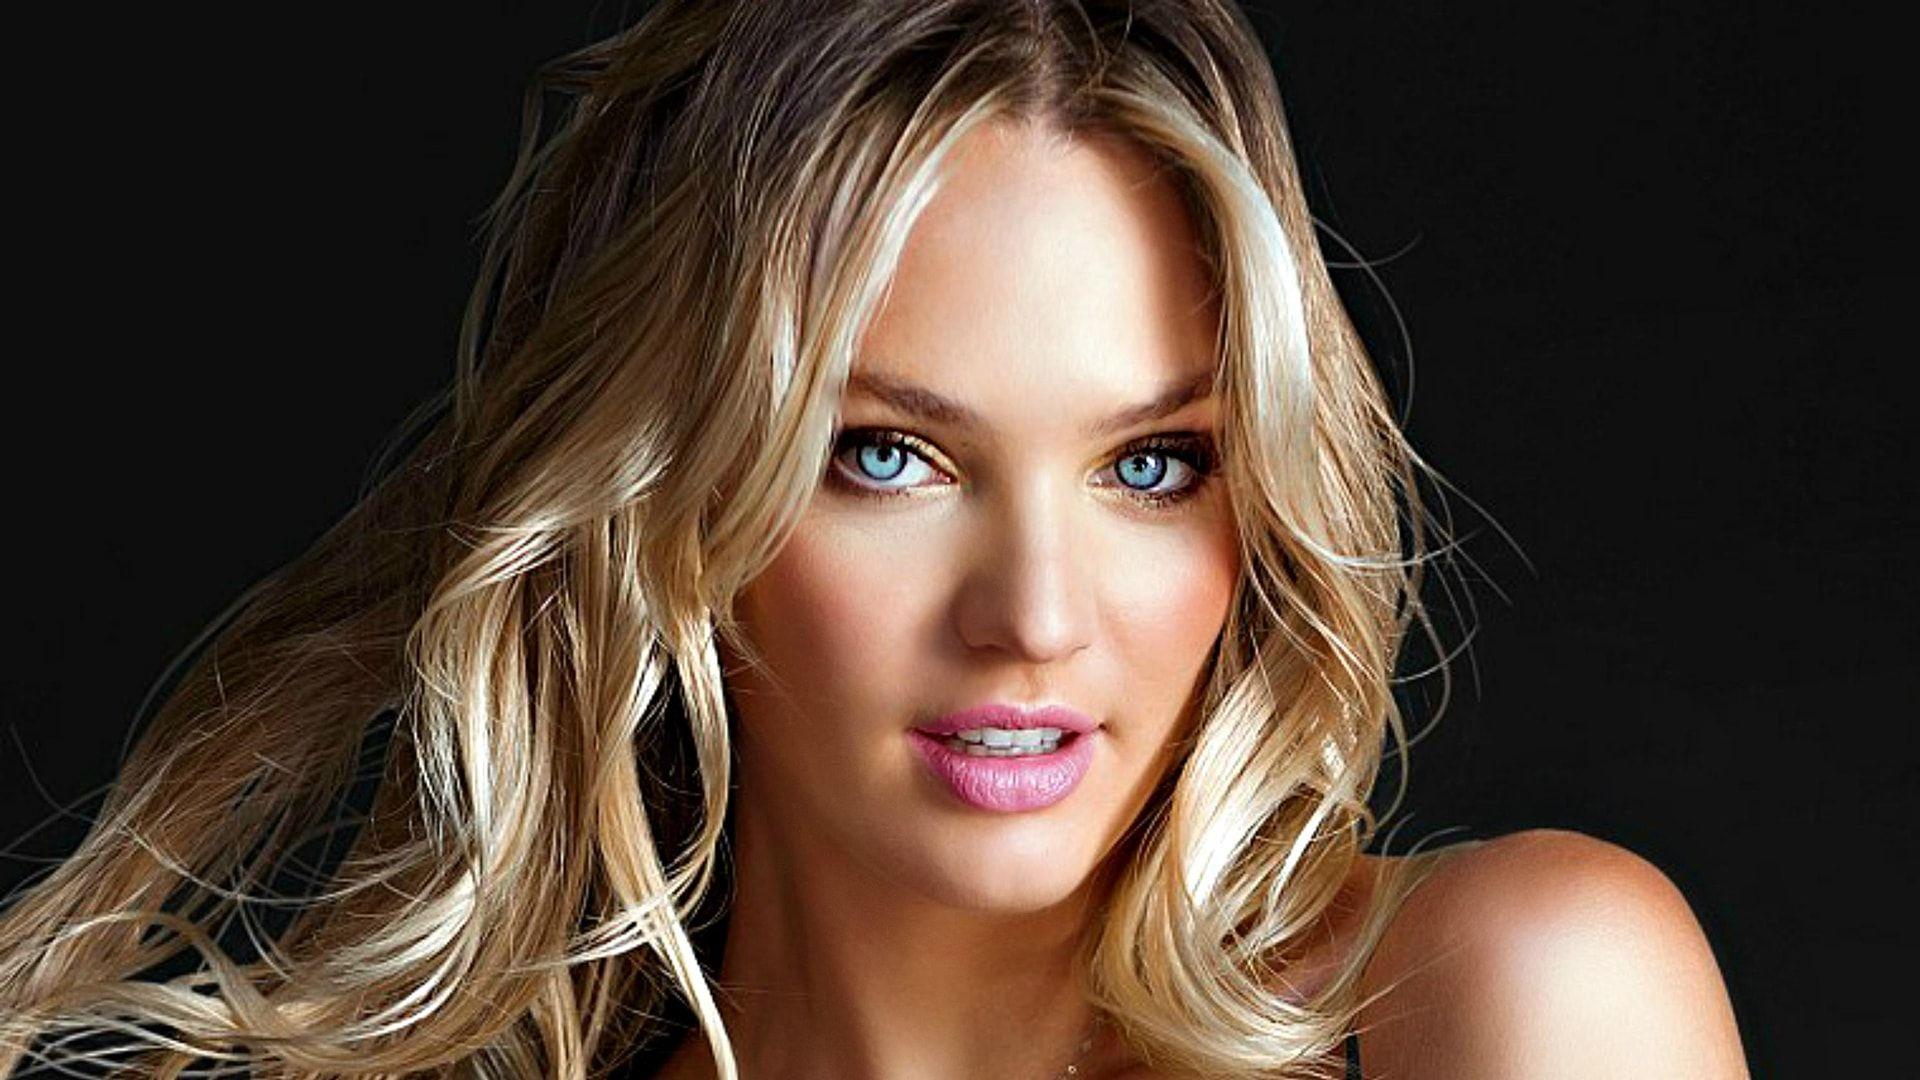 Candice Swanepoel Model Wallpapers Wallpaper Cave